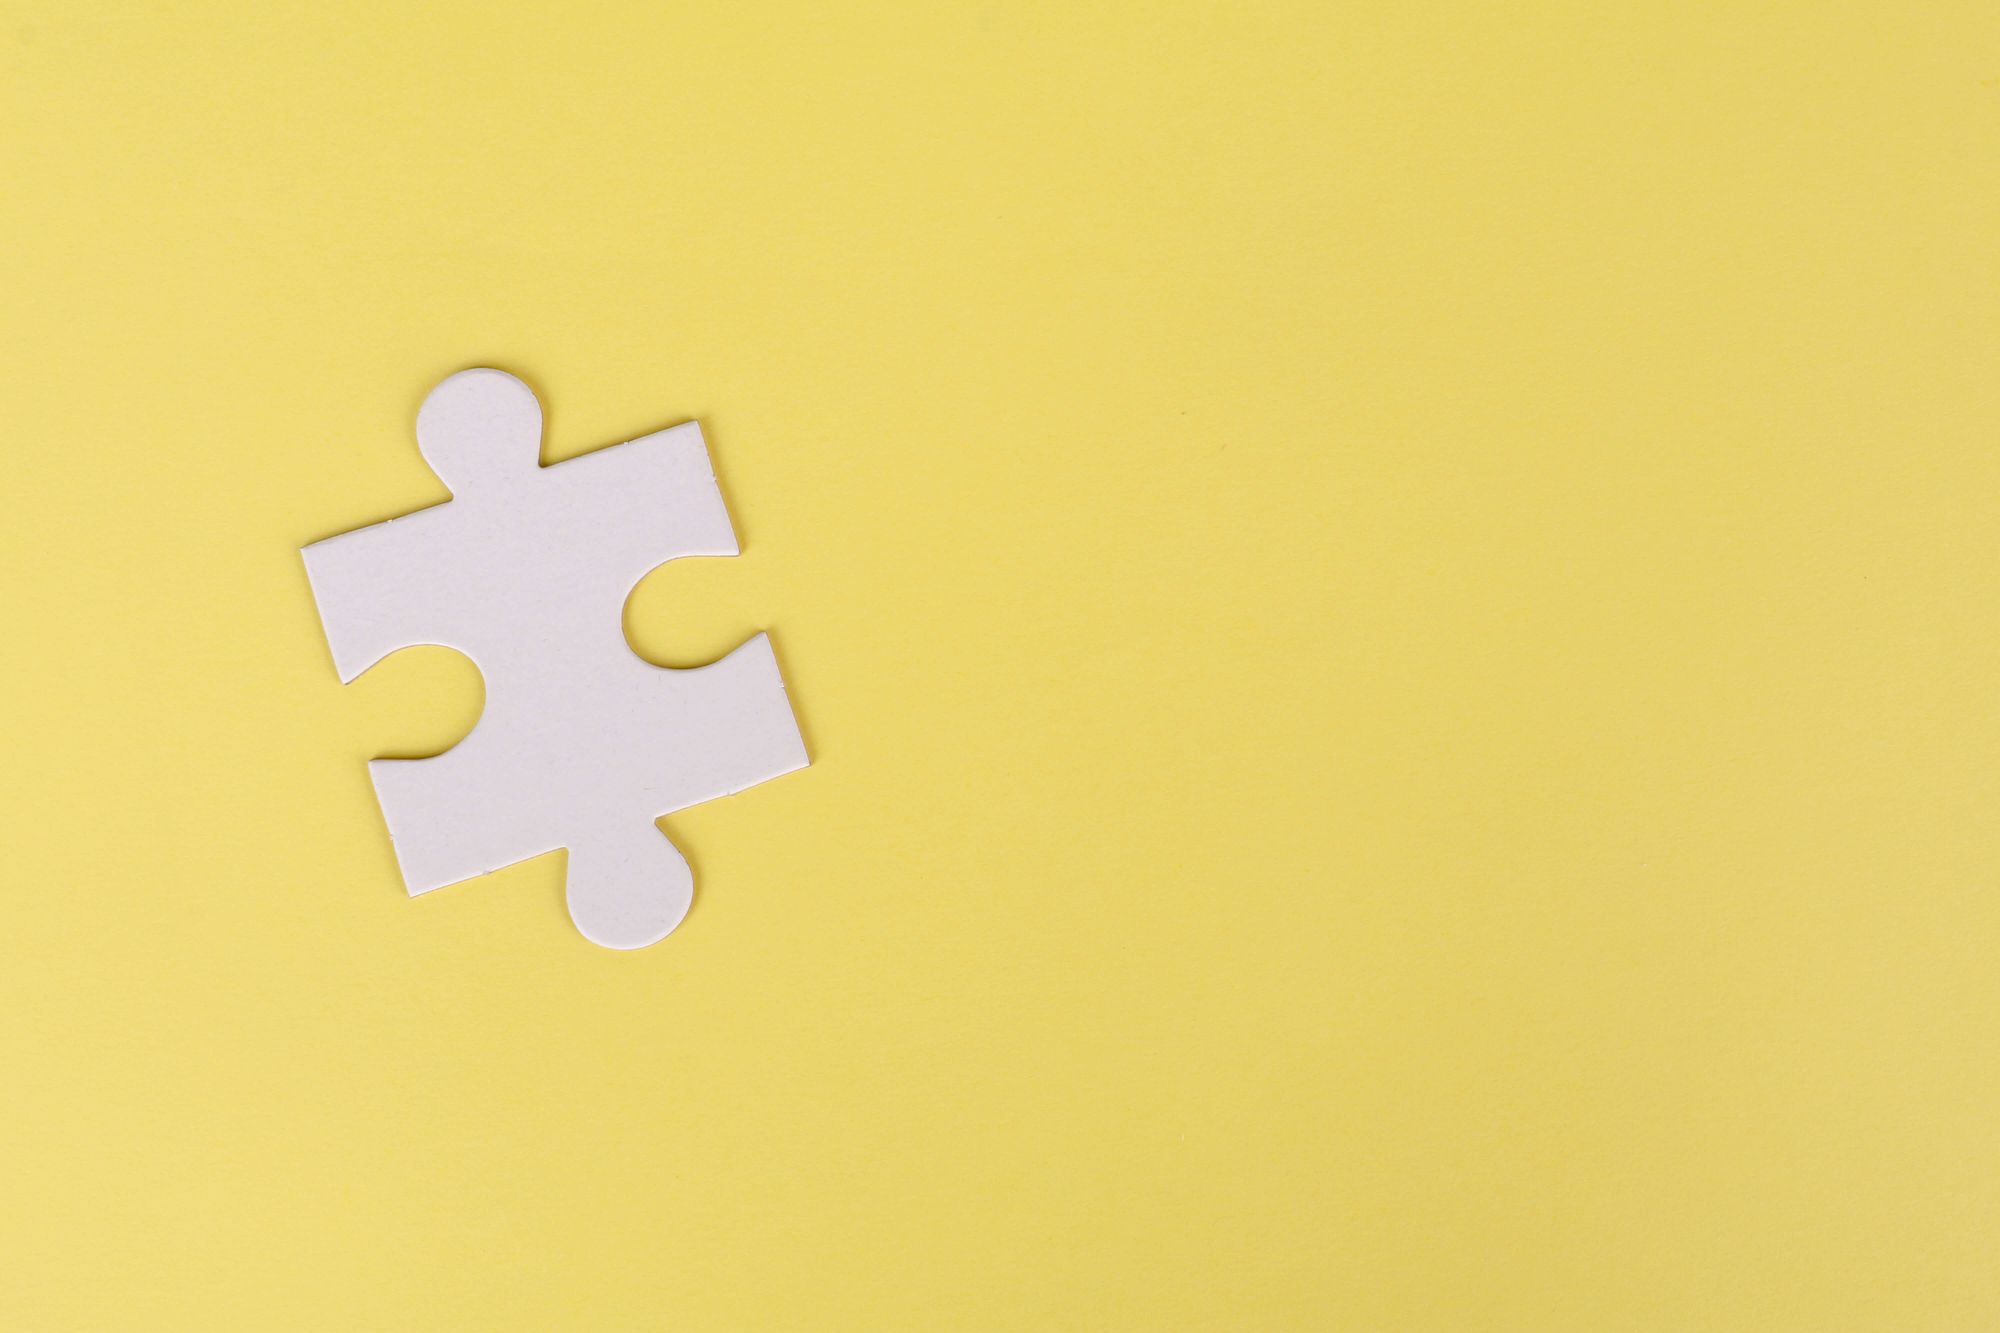 Photo of a white puzzle piece on a yellow surface